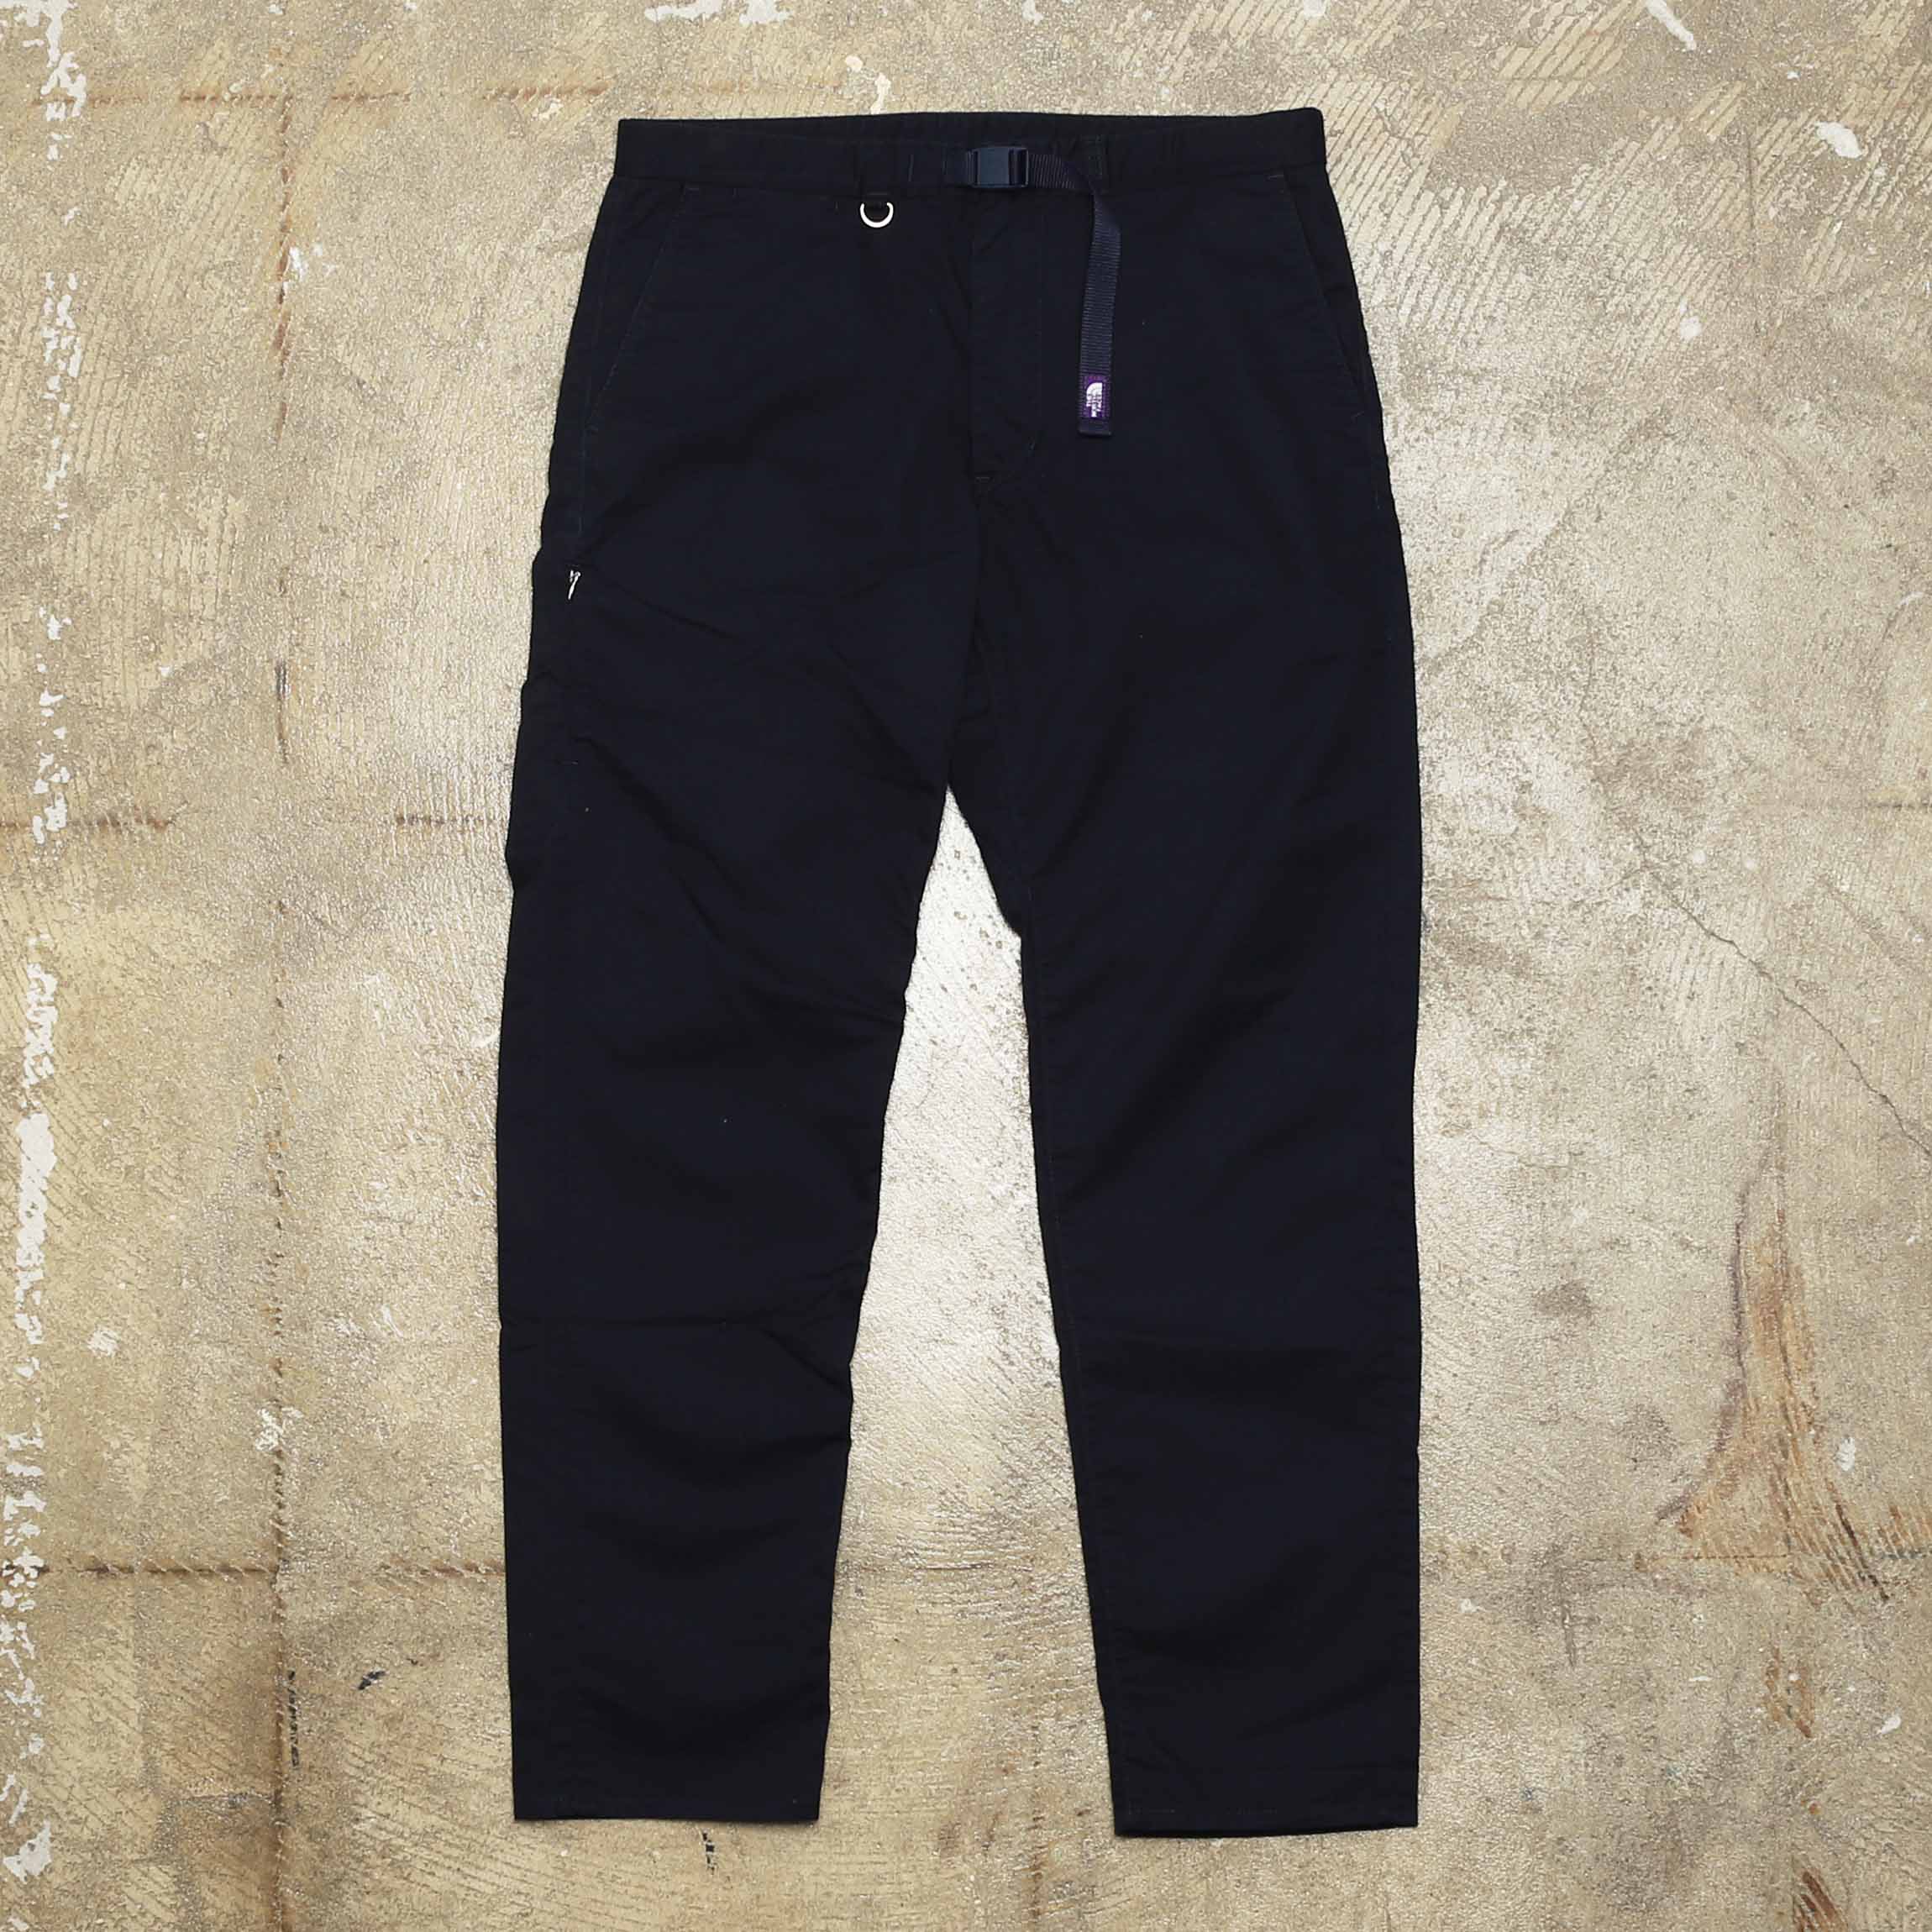 THE NORTH FACE PURPLE LABEL STRAIGHT PANTS - NAVY